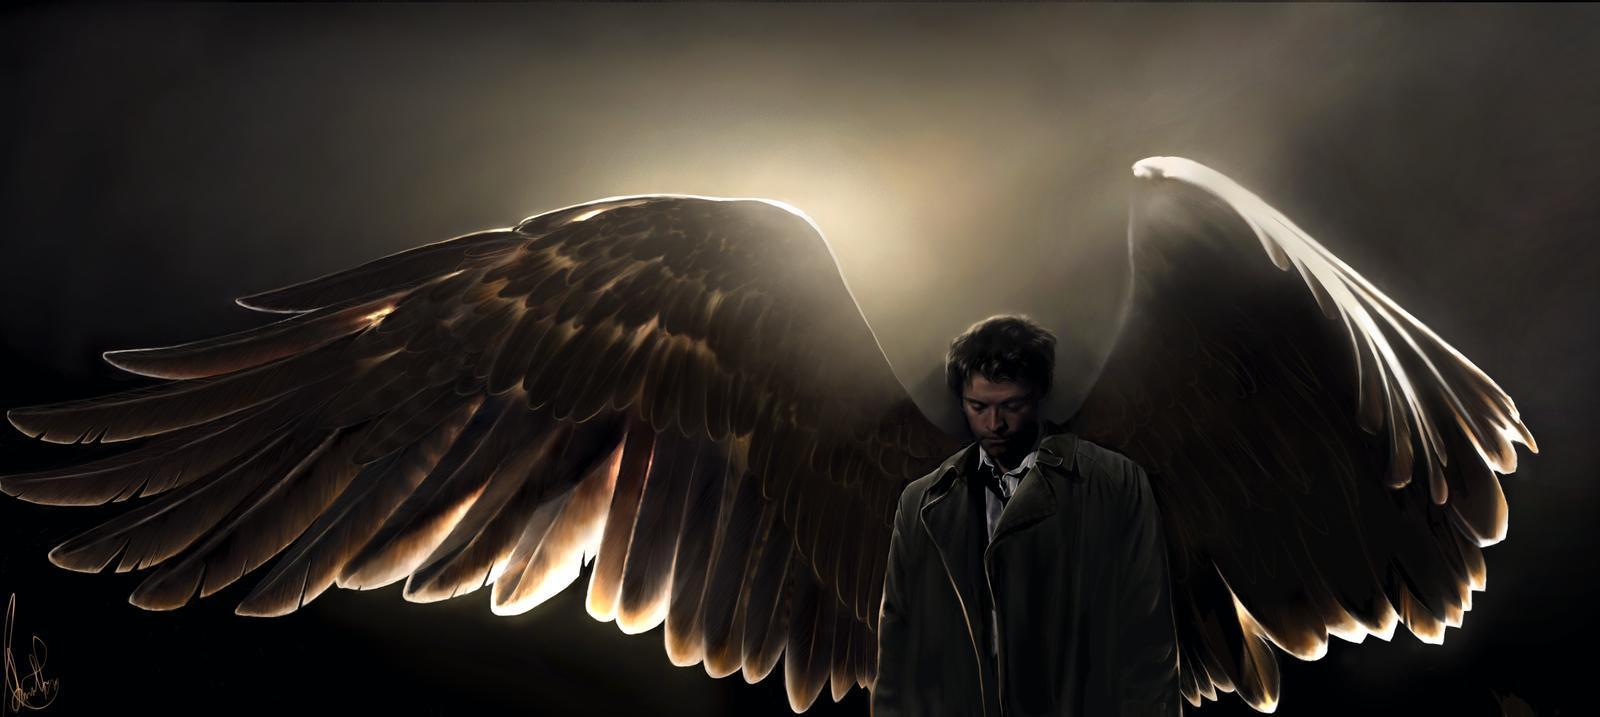 Supernatural Castiel With Wings Wallpaper